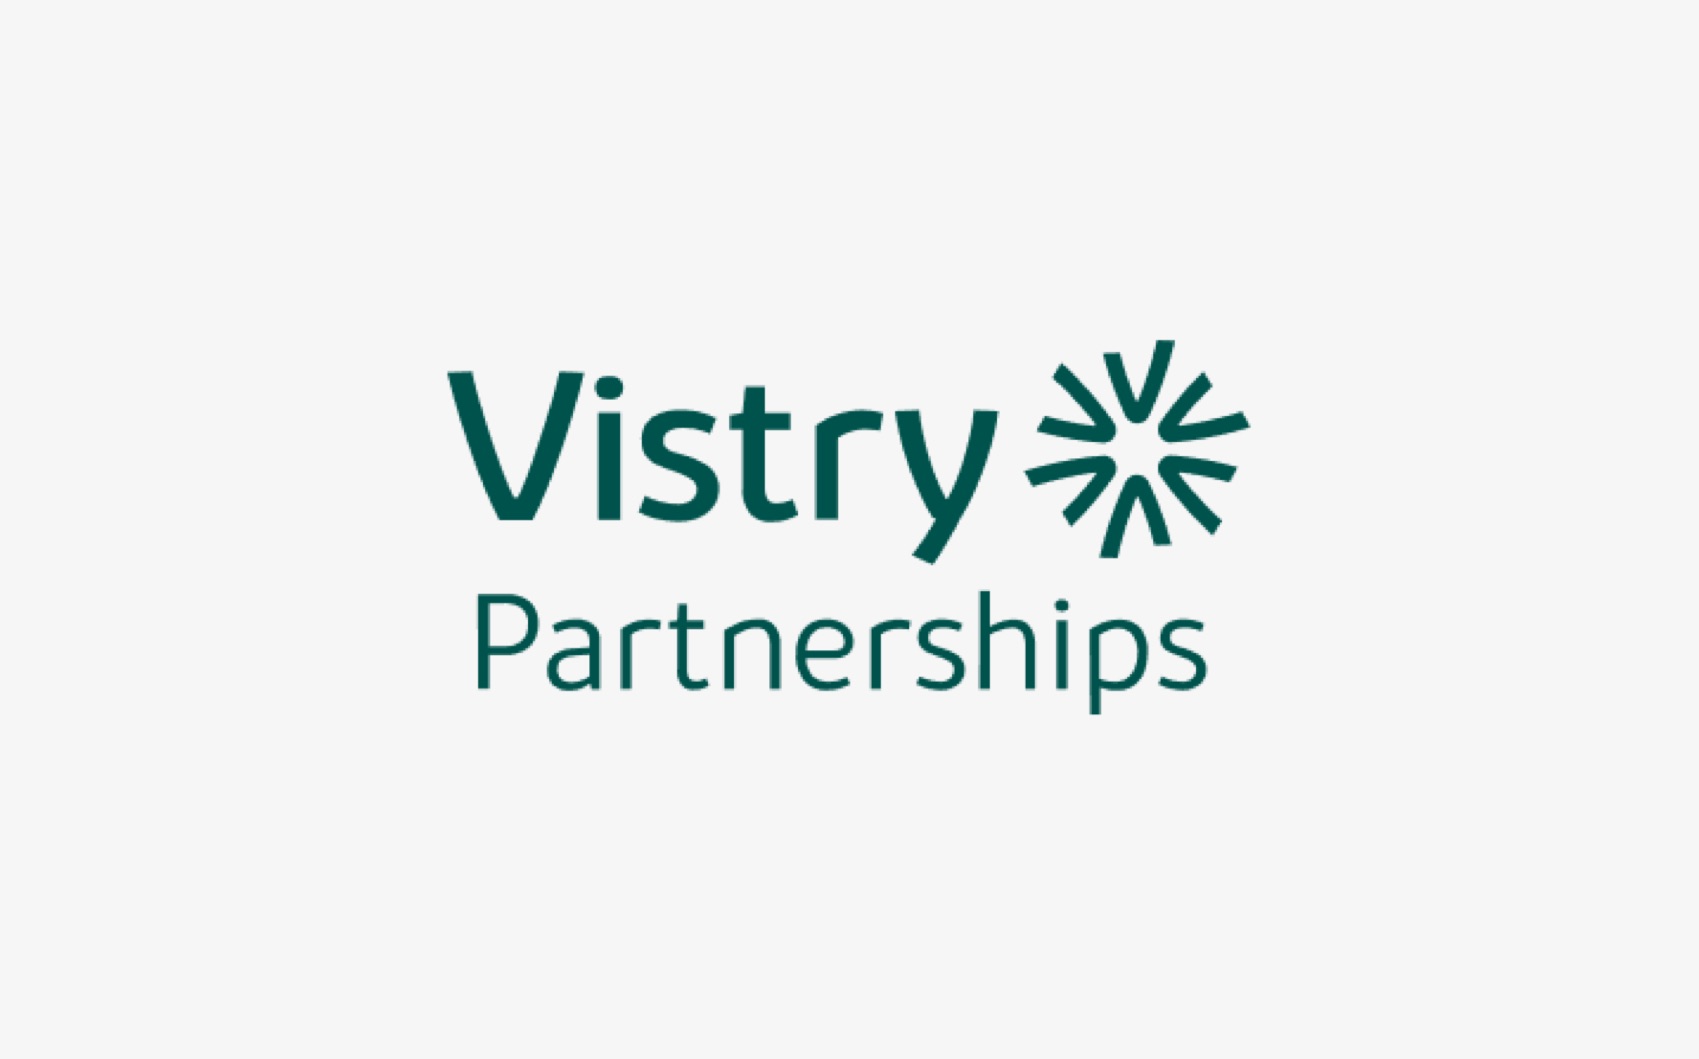 Great news for construction – and the country – with Vistry’s takeover of Countryside Partnership